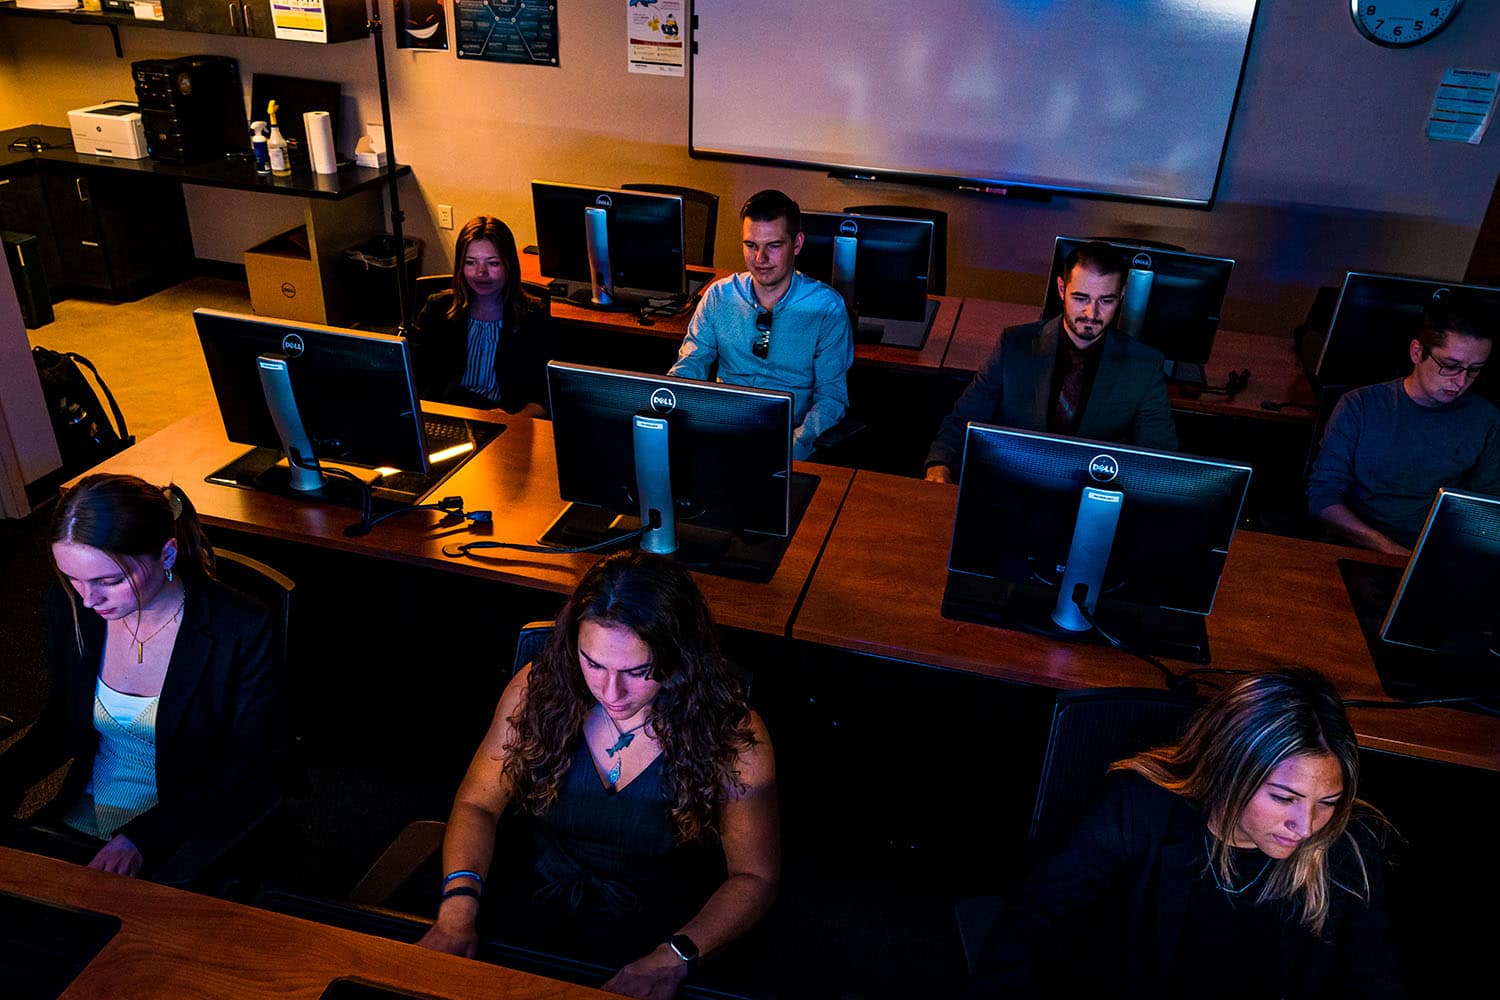 Several students sit in front of desktop computers in a darkened classroom.